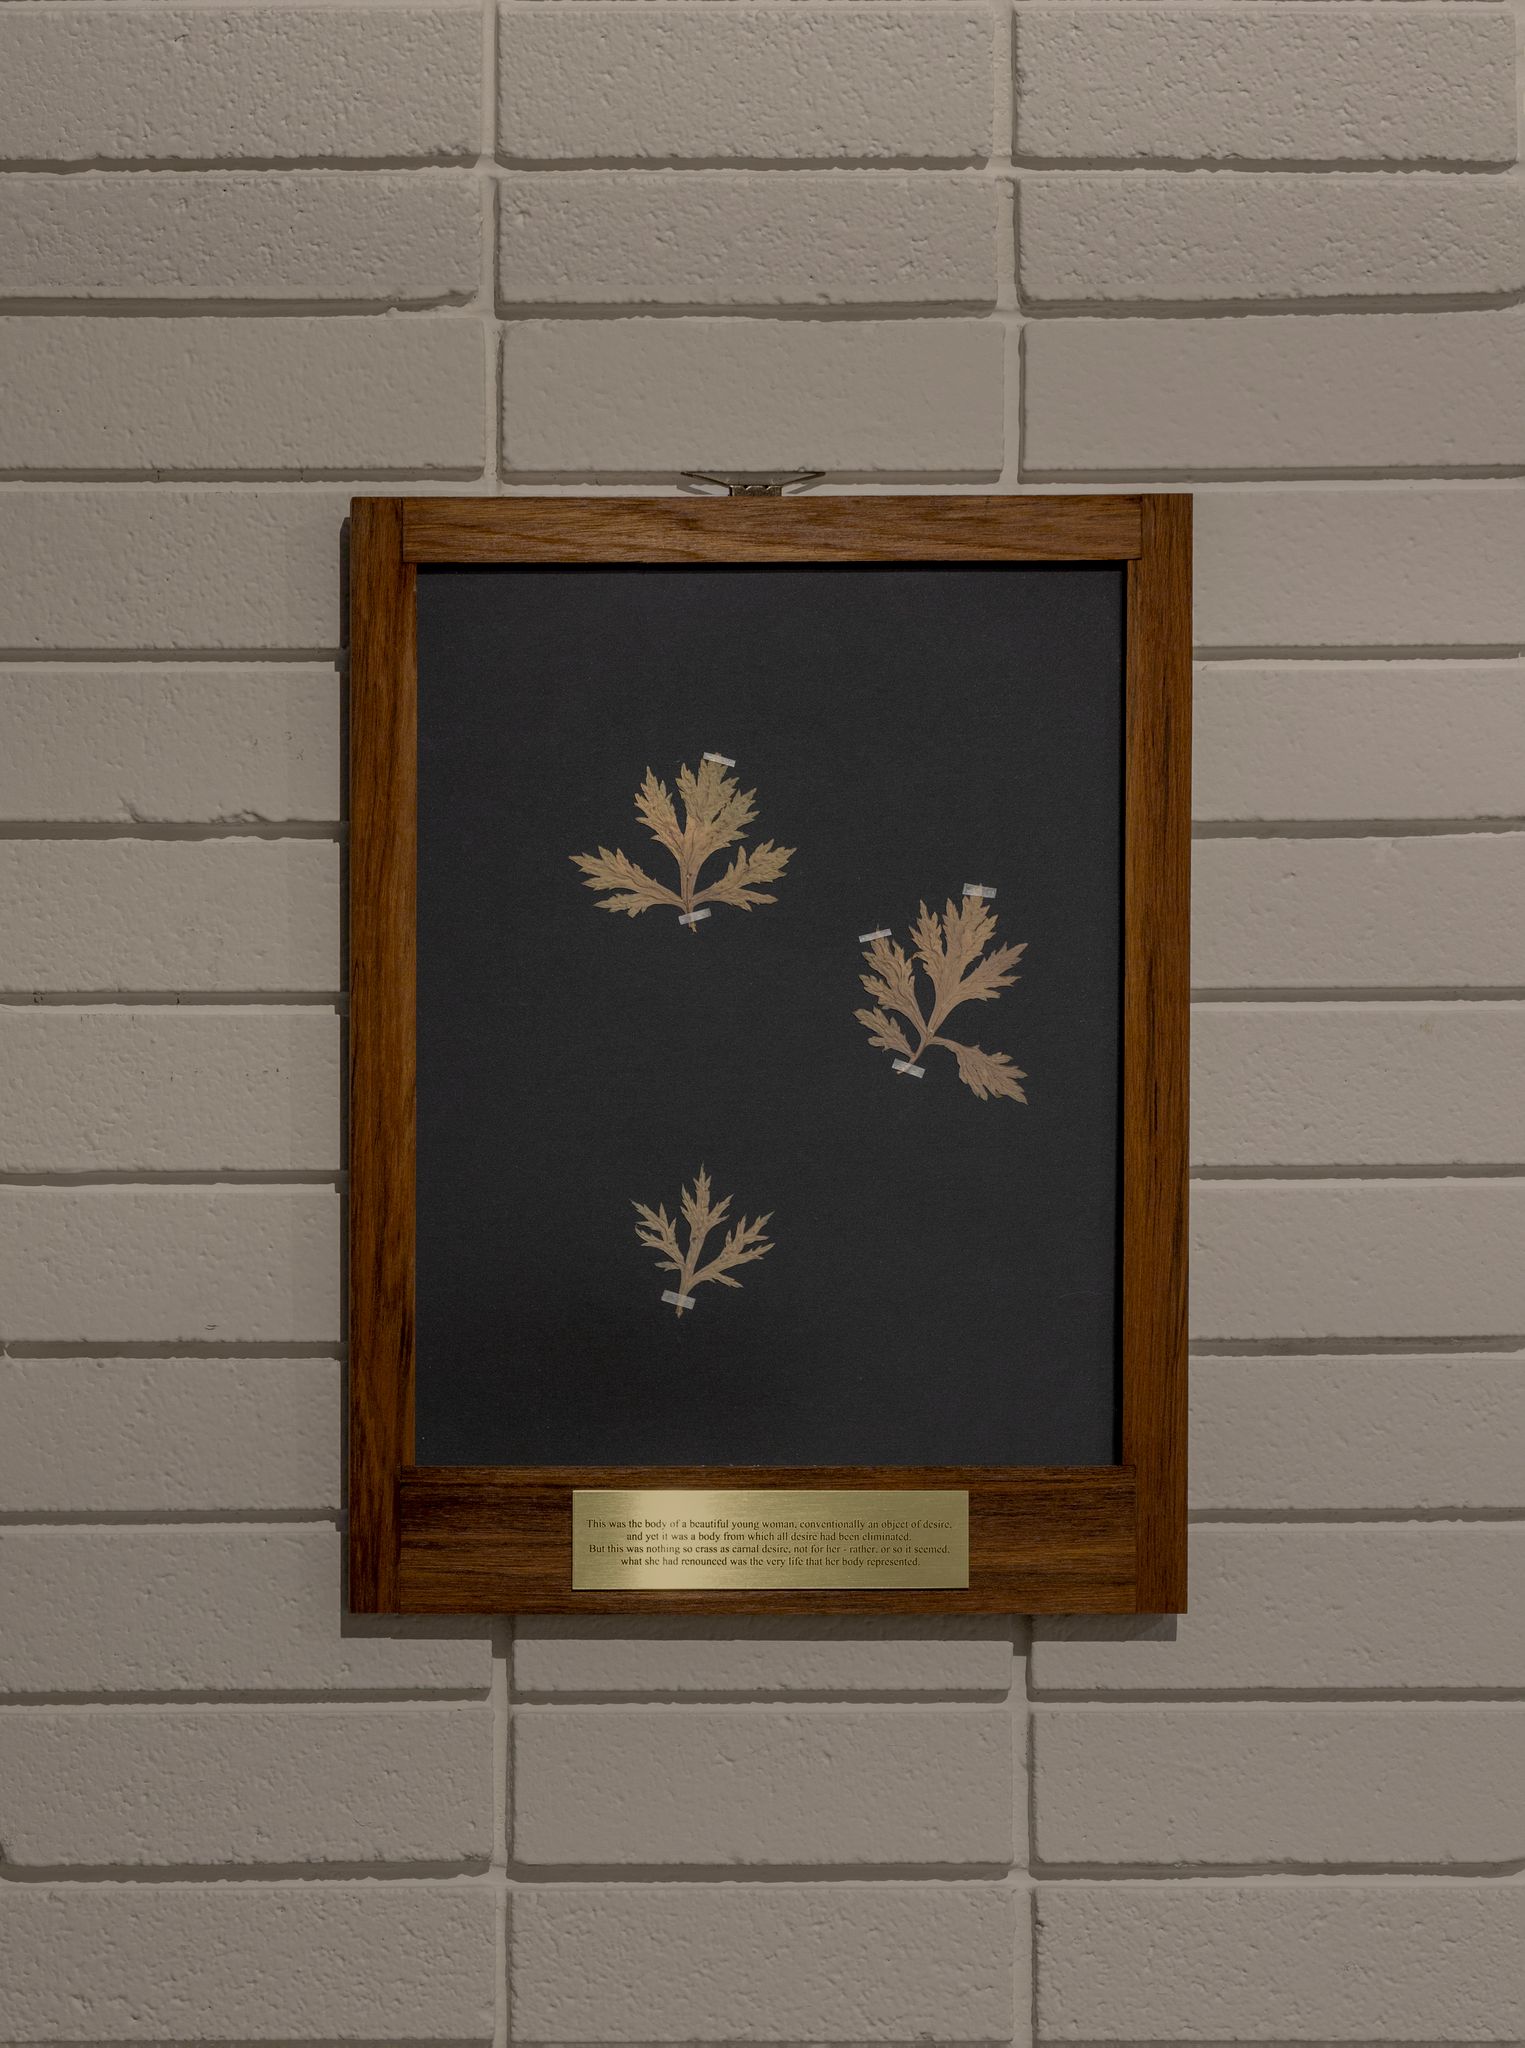 Close-up image of plaque with pressed mugwort leaves on a black background, hung on a white brick wall.